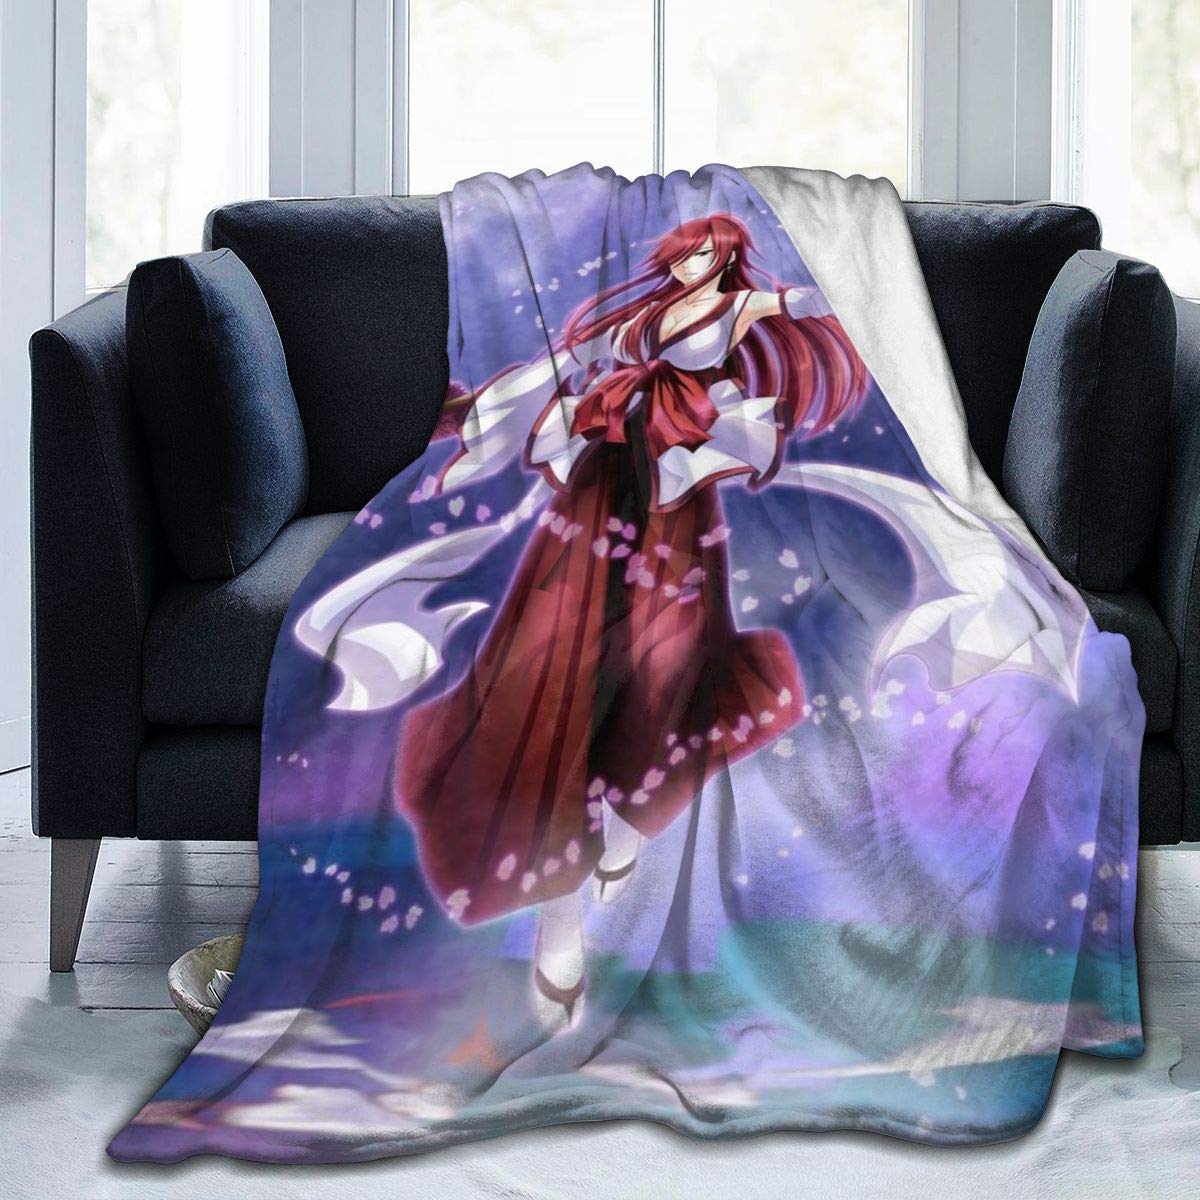 DM Maker Flannel Fleece Novelty Throw Blanket Fairy Tail Erza Scarlet Blanket for Spring Outdoor Ultra Soft and Large Anti-Static Blankets 60"X...